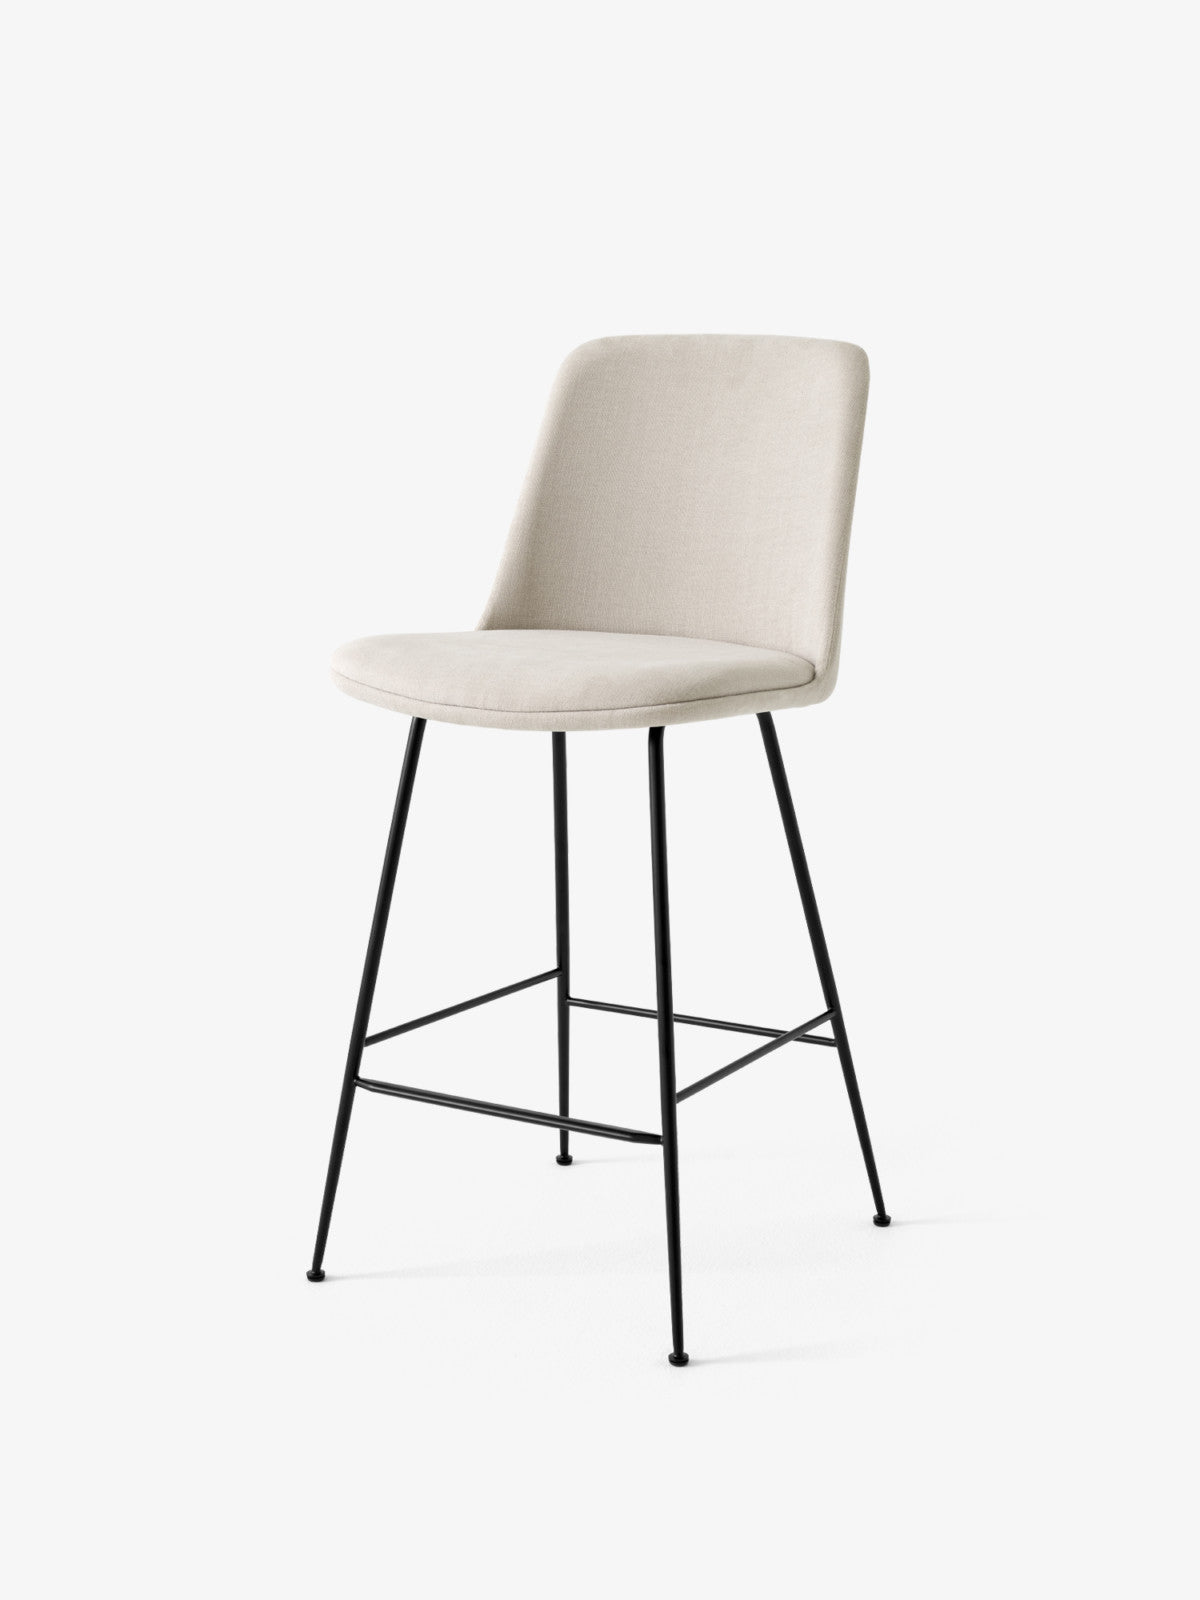 Rely Counter Chair HW94 Full Upholstery